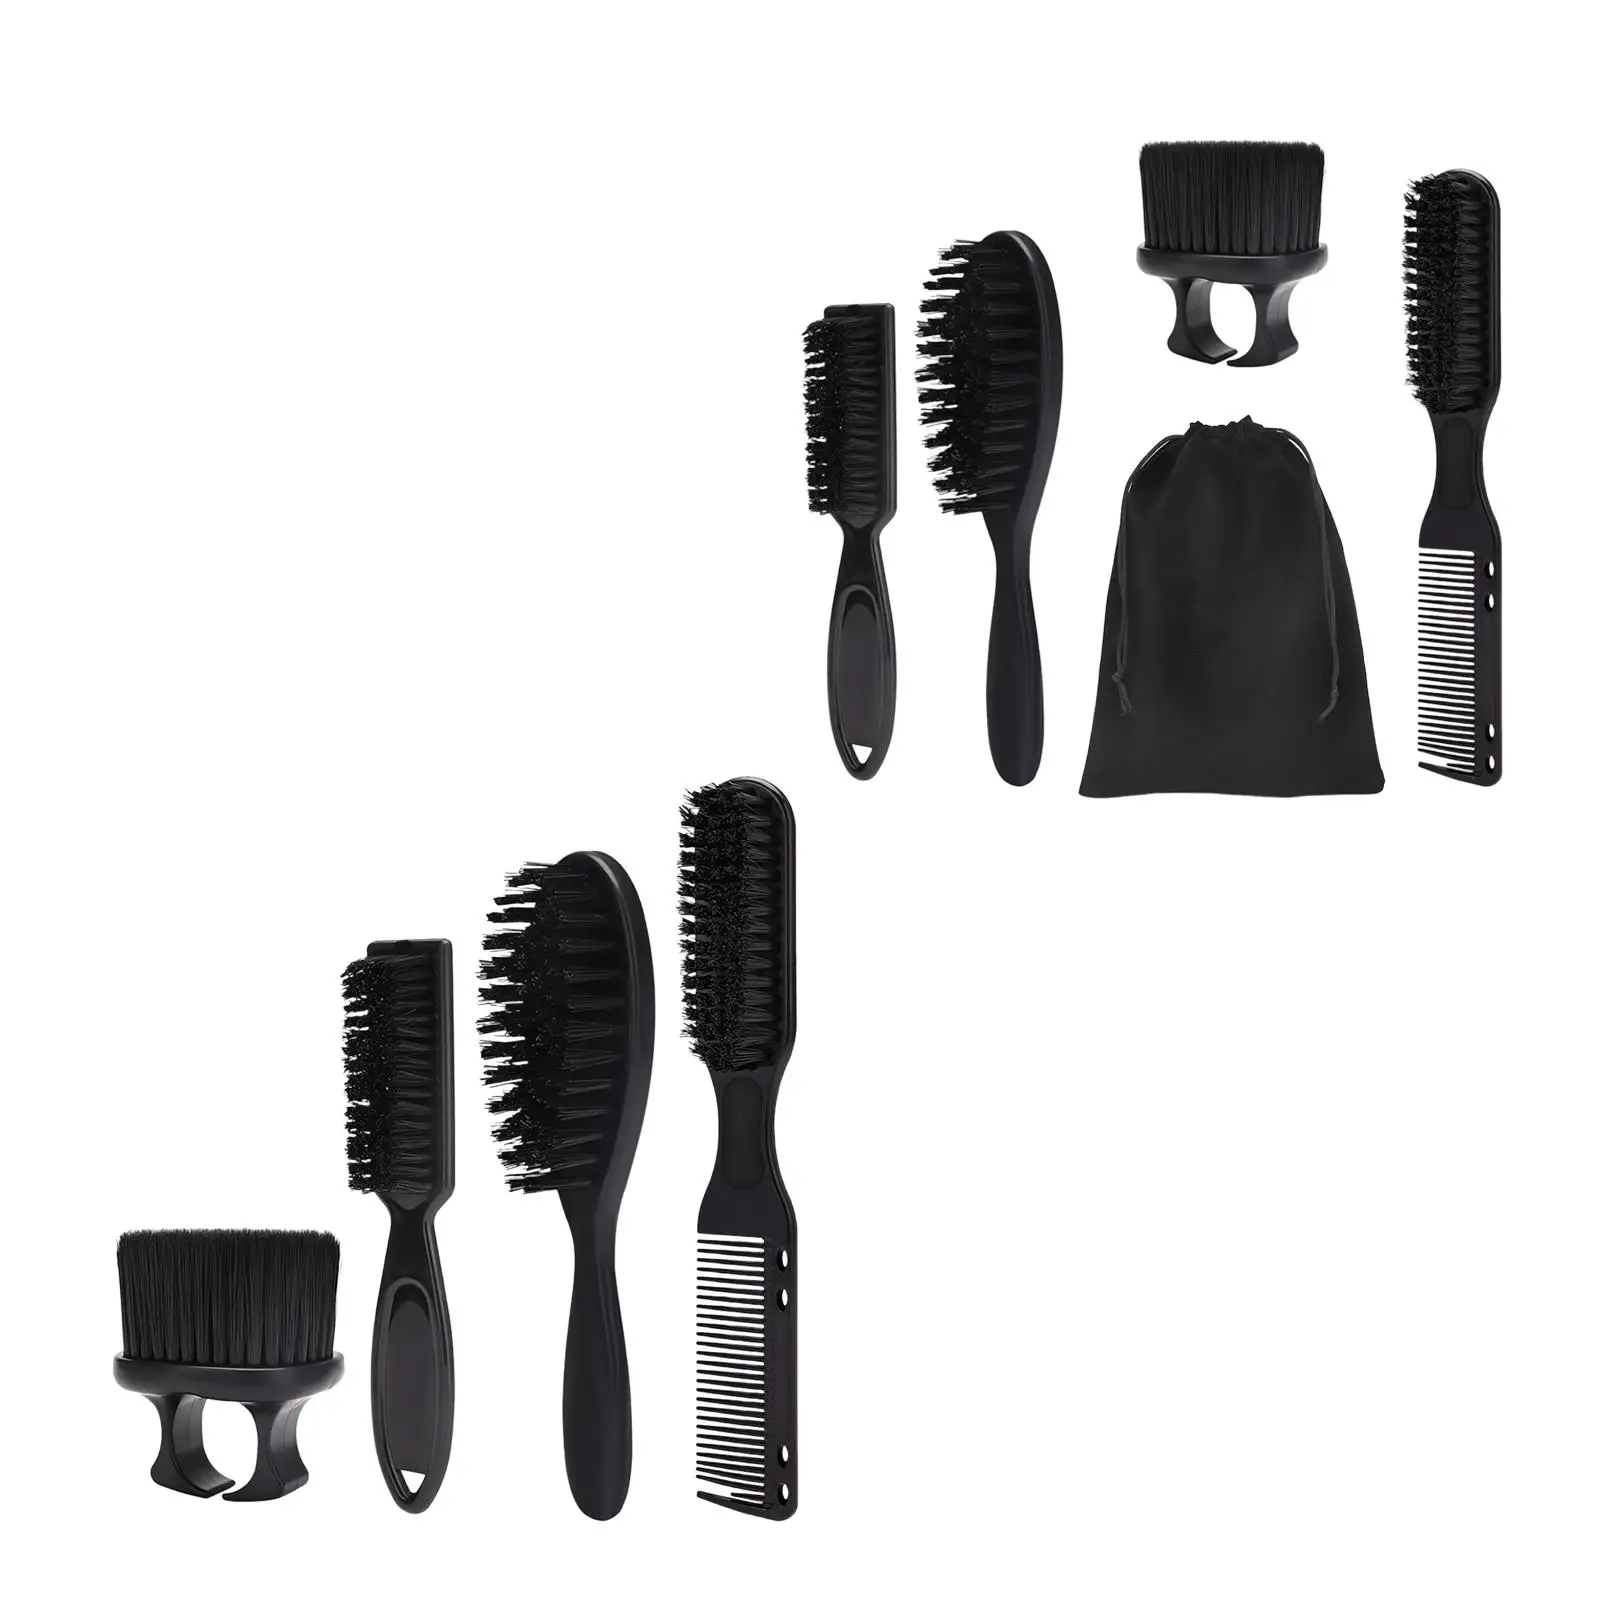 Barber Brush and Barber Comb Set Reusable Portable Barber Cleaning Hairbrush for Husband Boyfriend Dad Father`s Day Gifts Salon